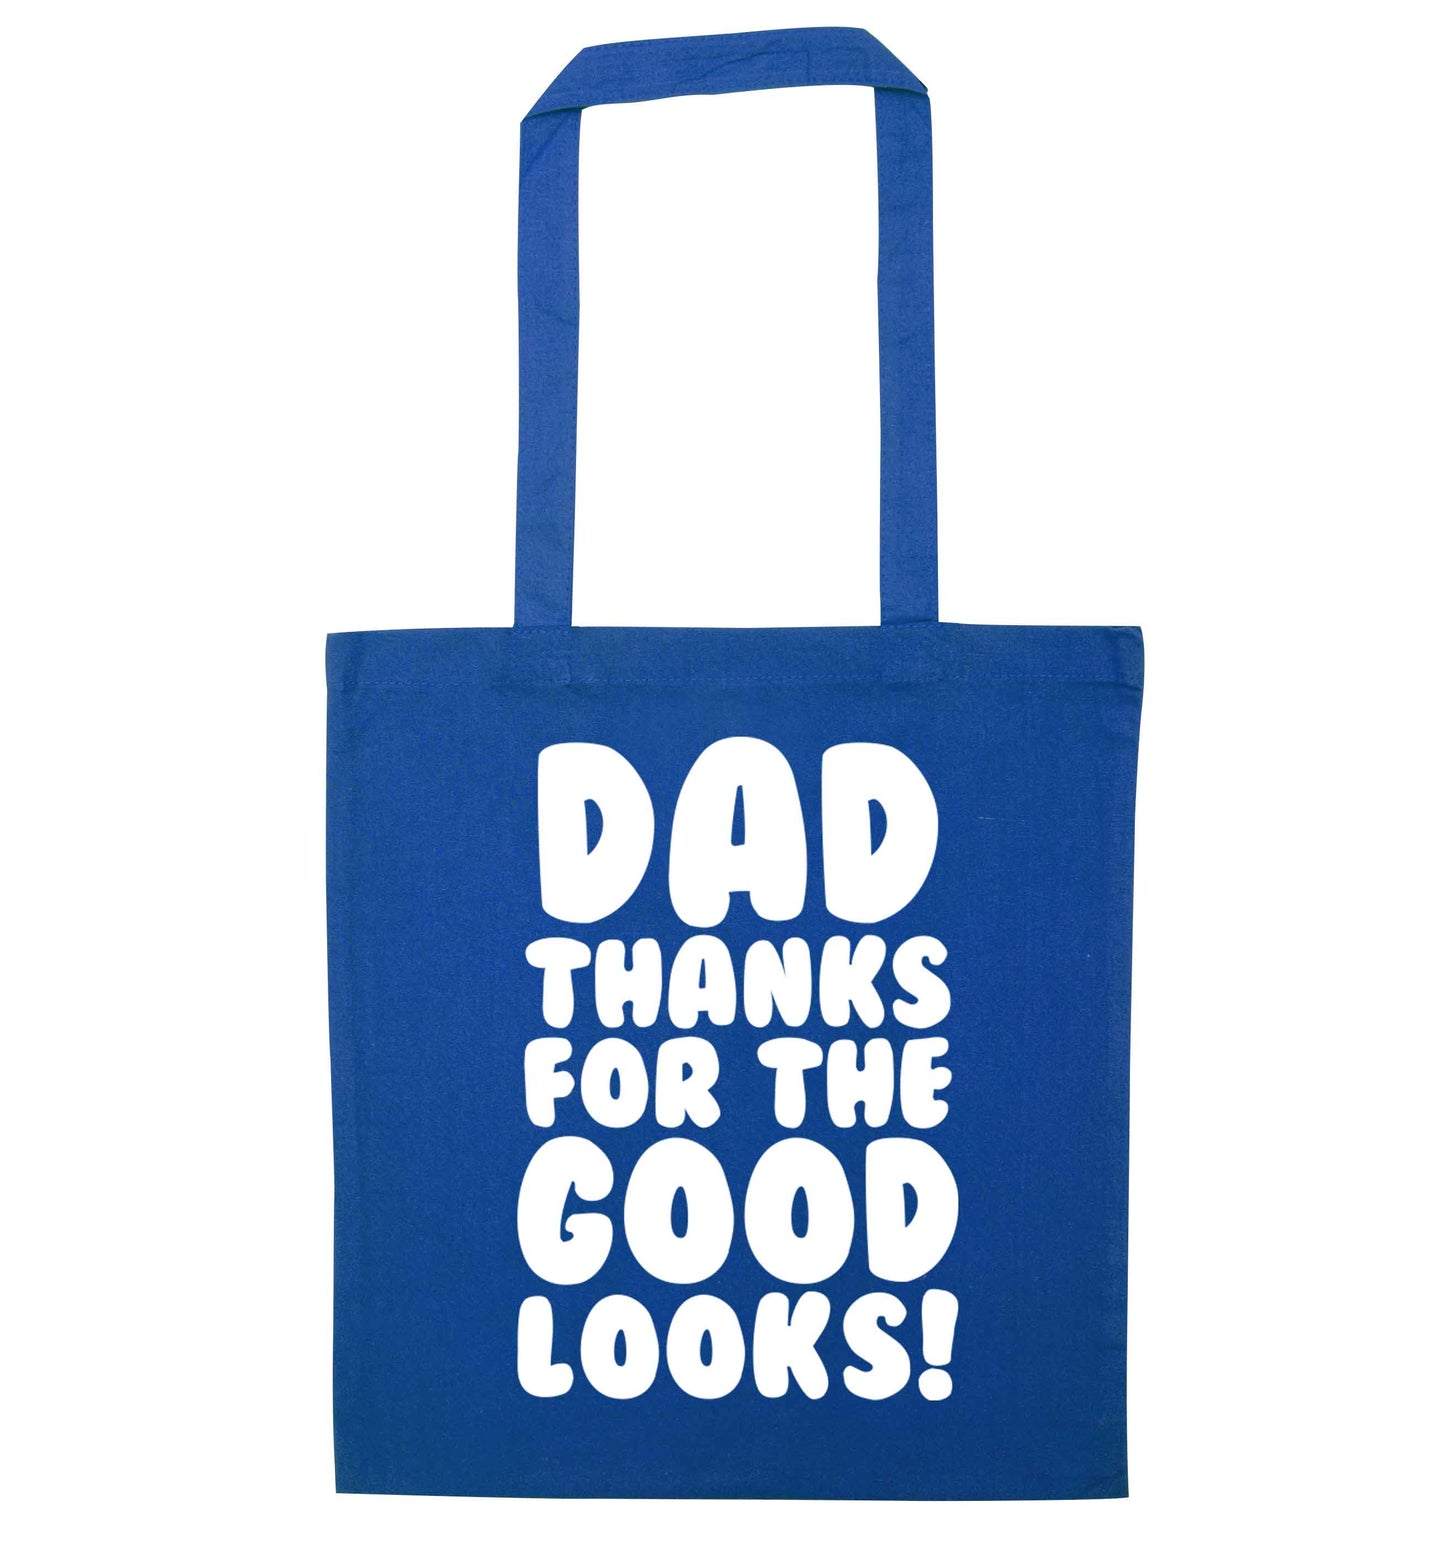 Dad thanks for the good looks blue tote bag